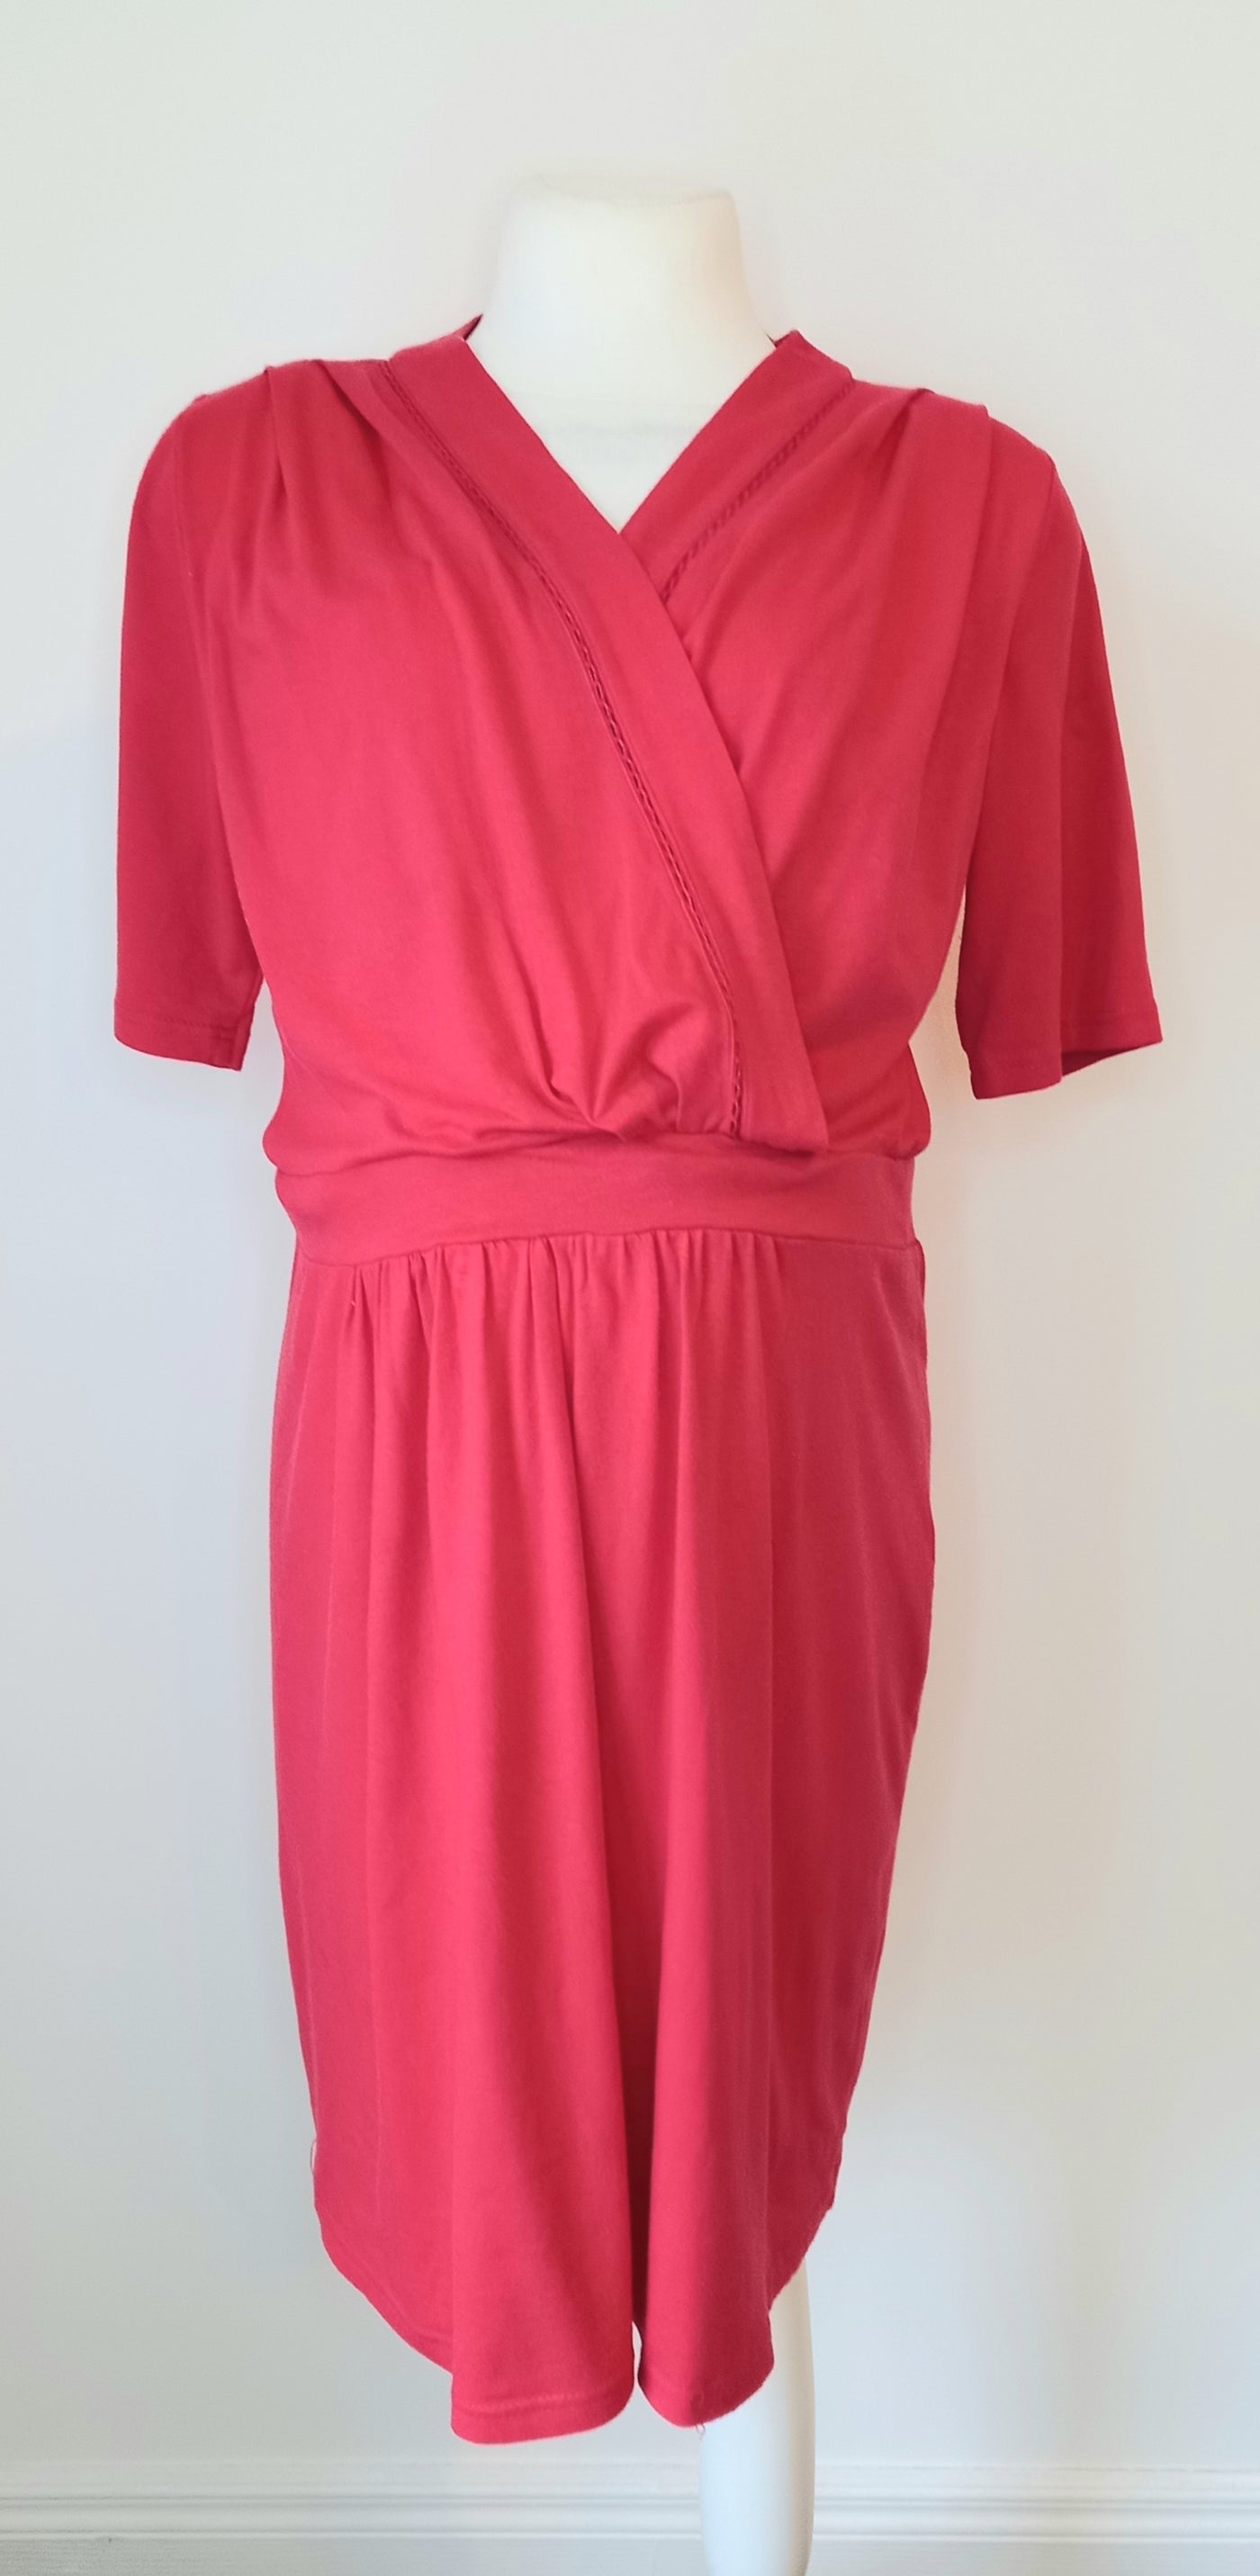 Mamalicious Red Crossover Nursing Dress - Size L (Approx UK 14/16)